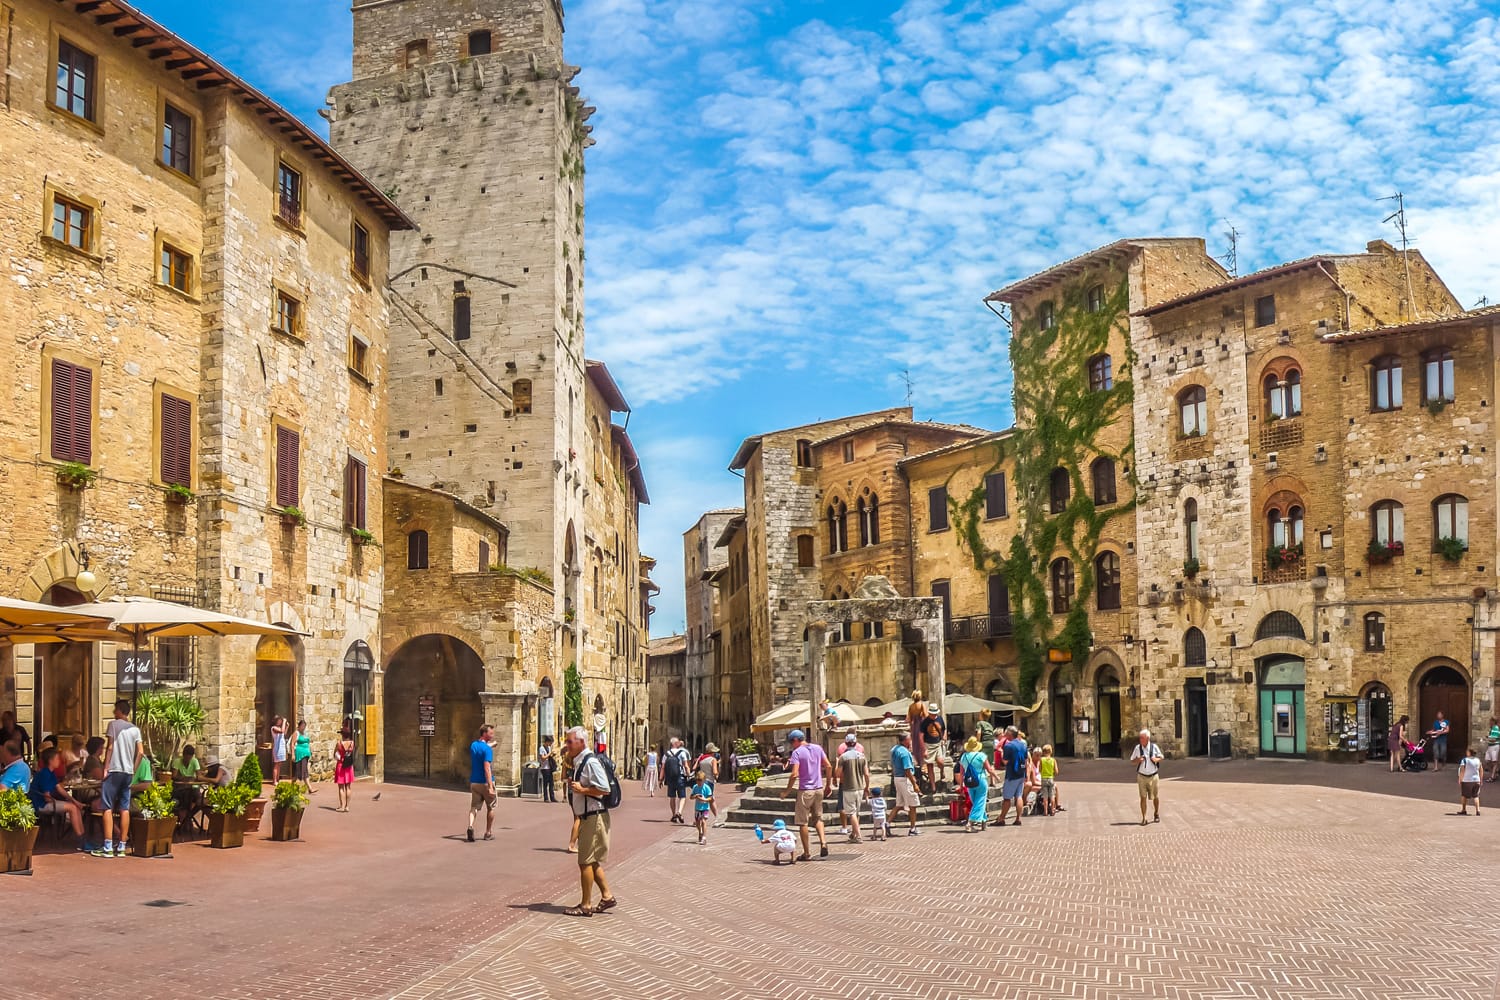 Panoramic view of famous Piazza della Cisterna in the historic town of San Gimignano on a sunny day, Tuscany, Italy